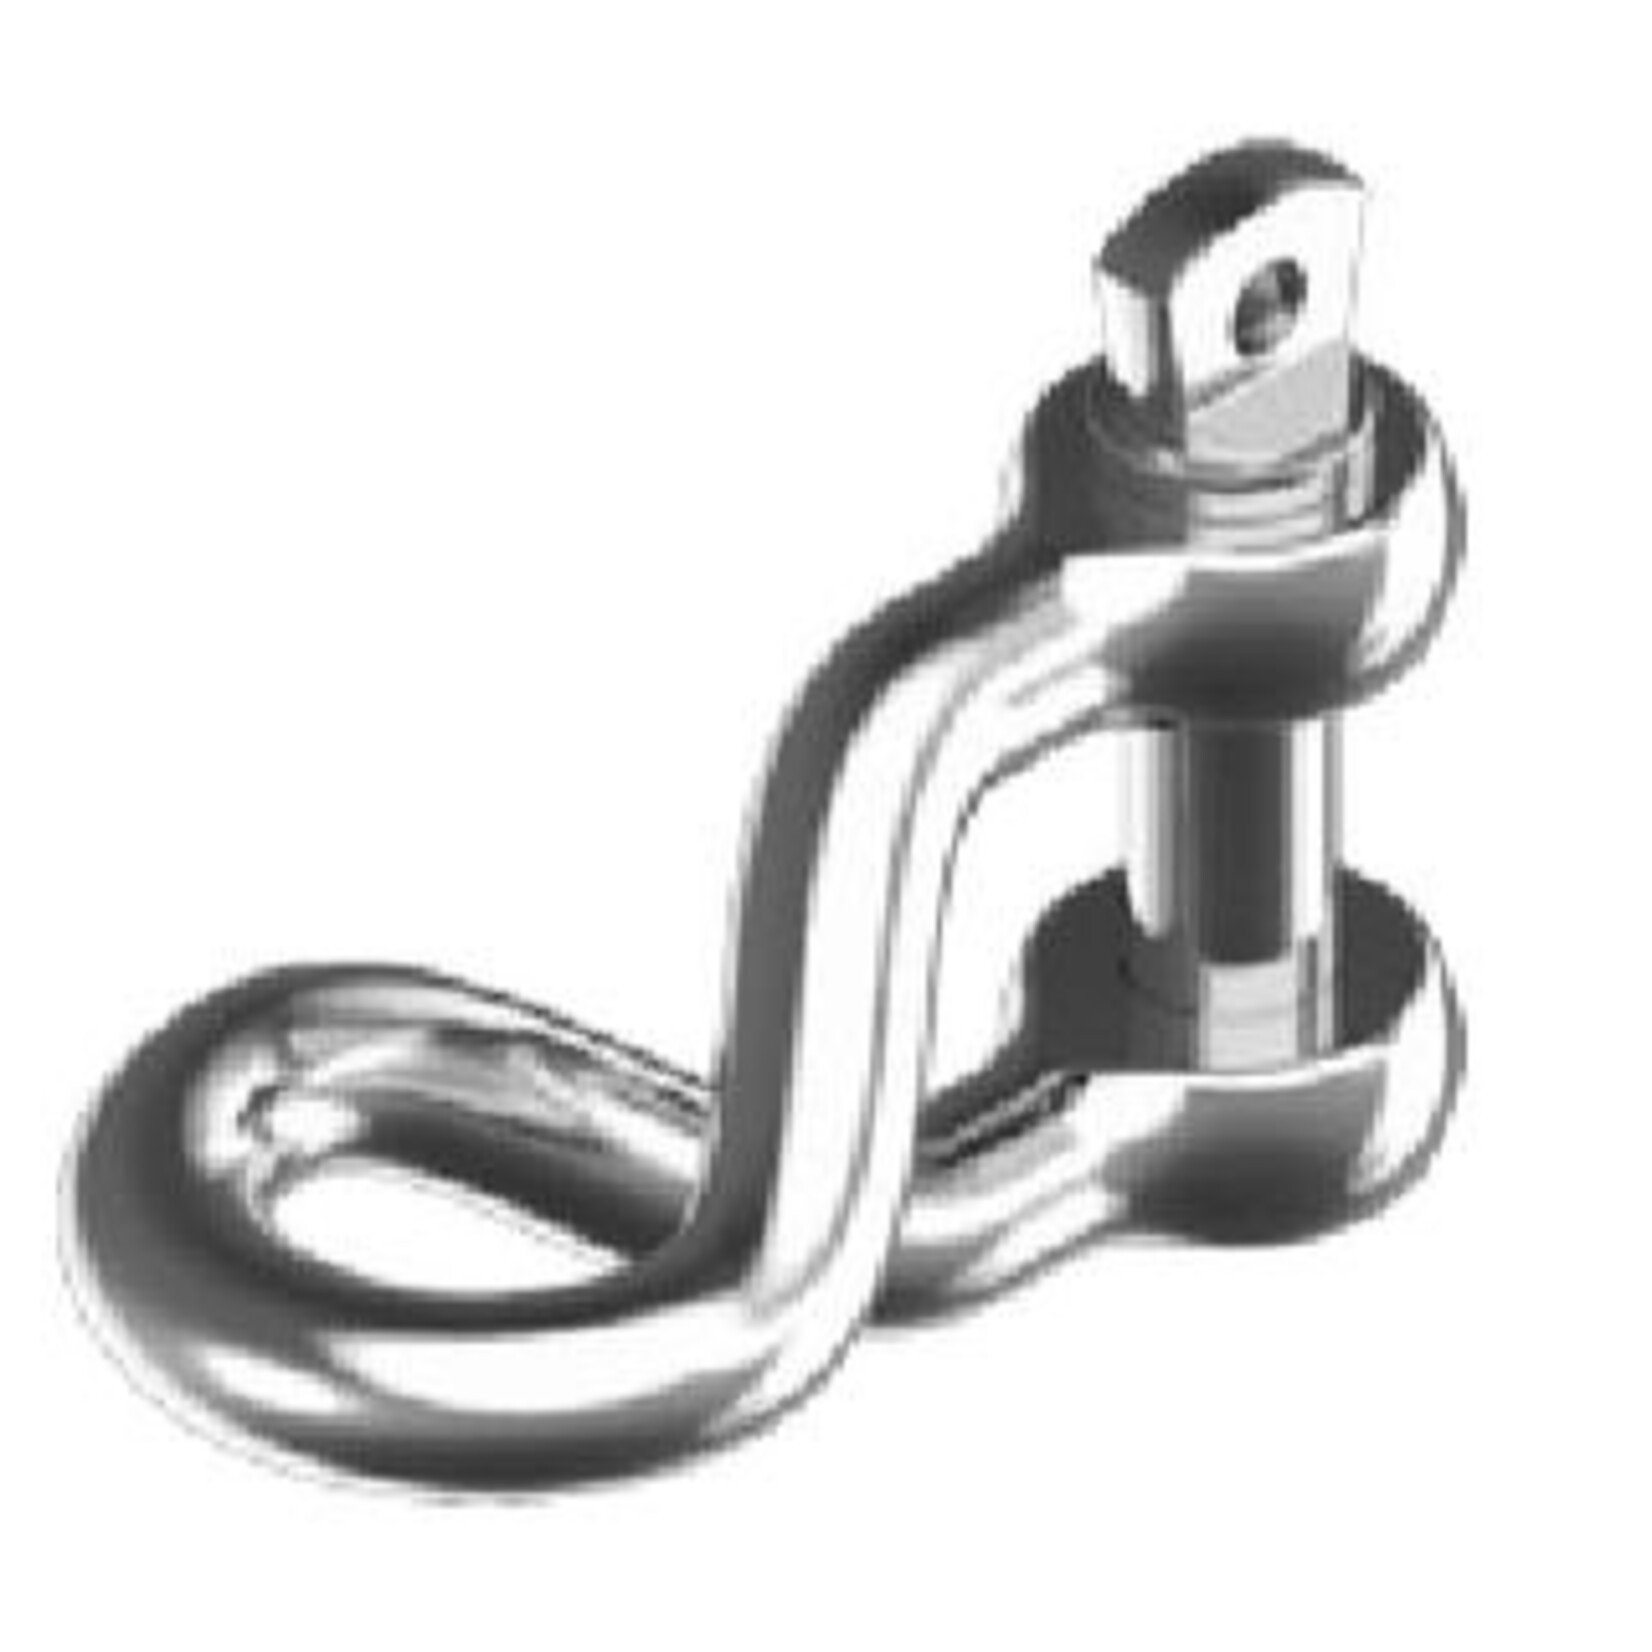 Stainless twisted shackle 10mm